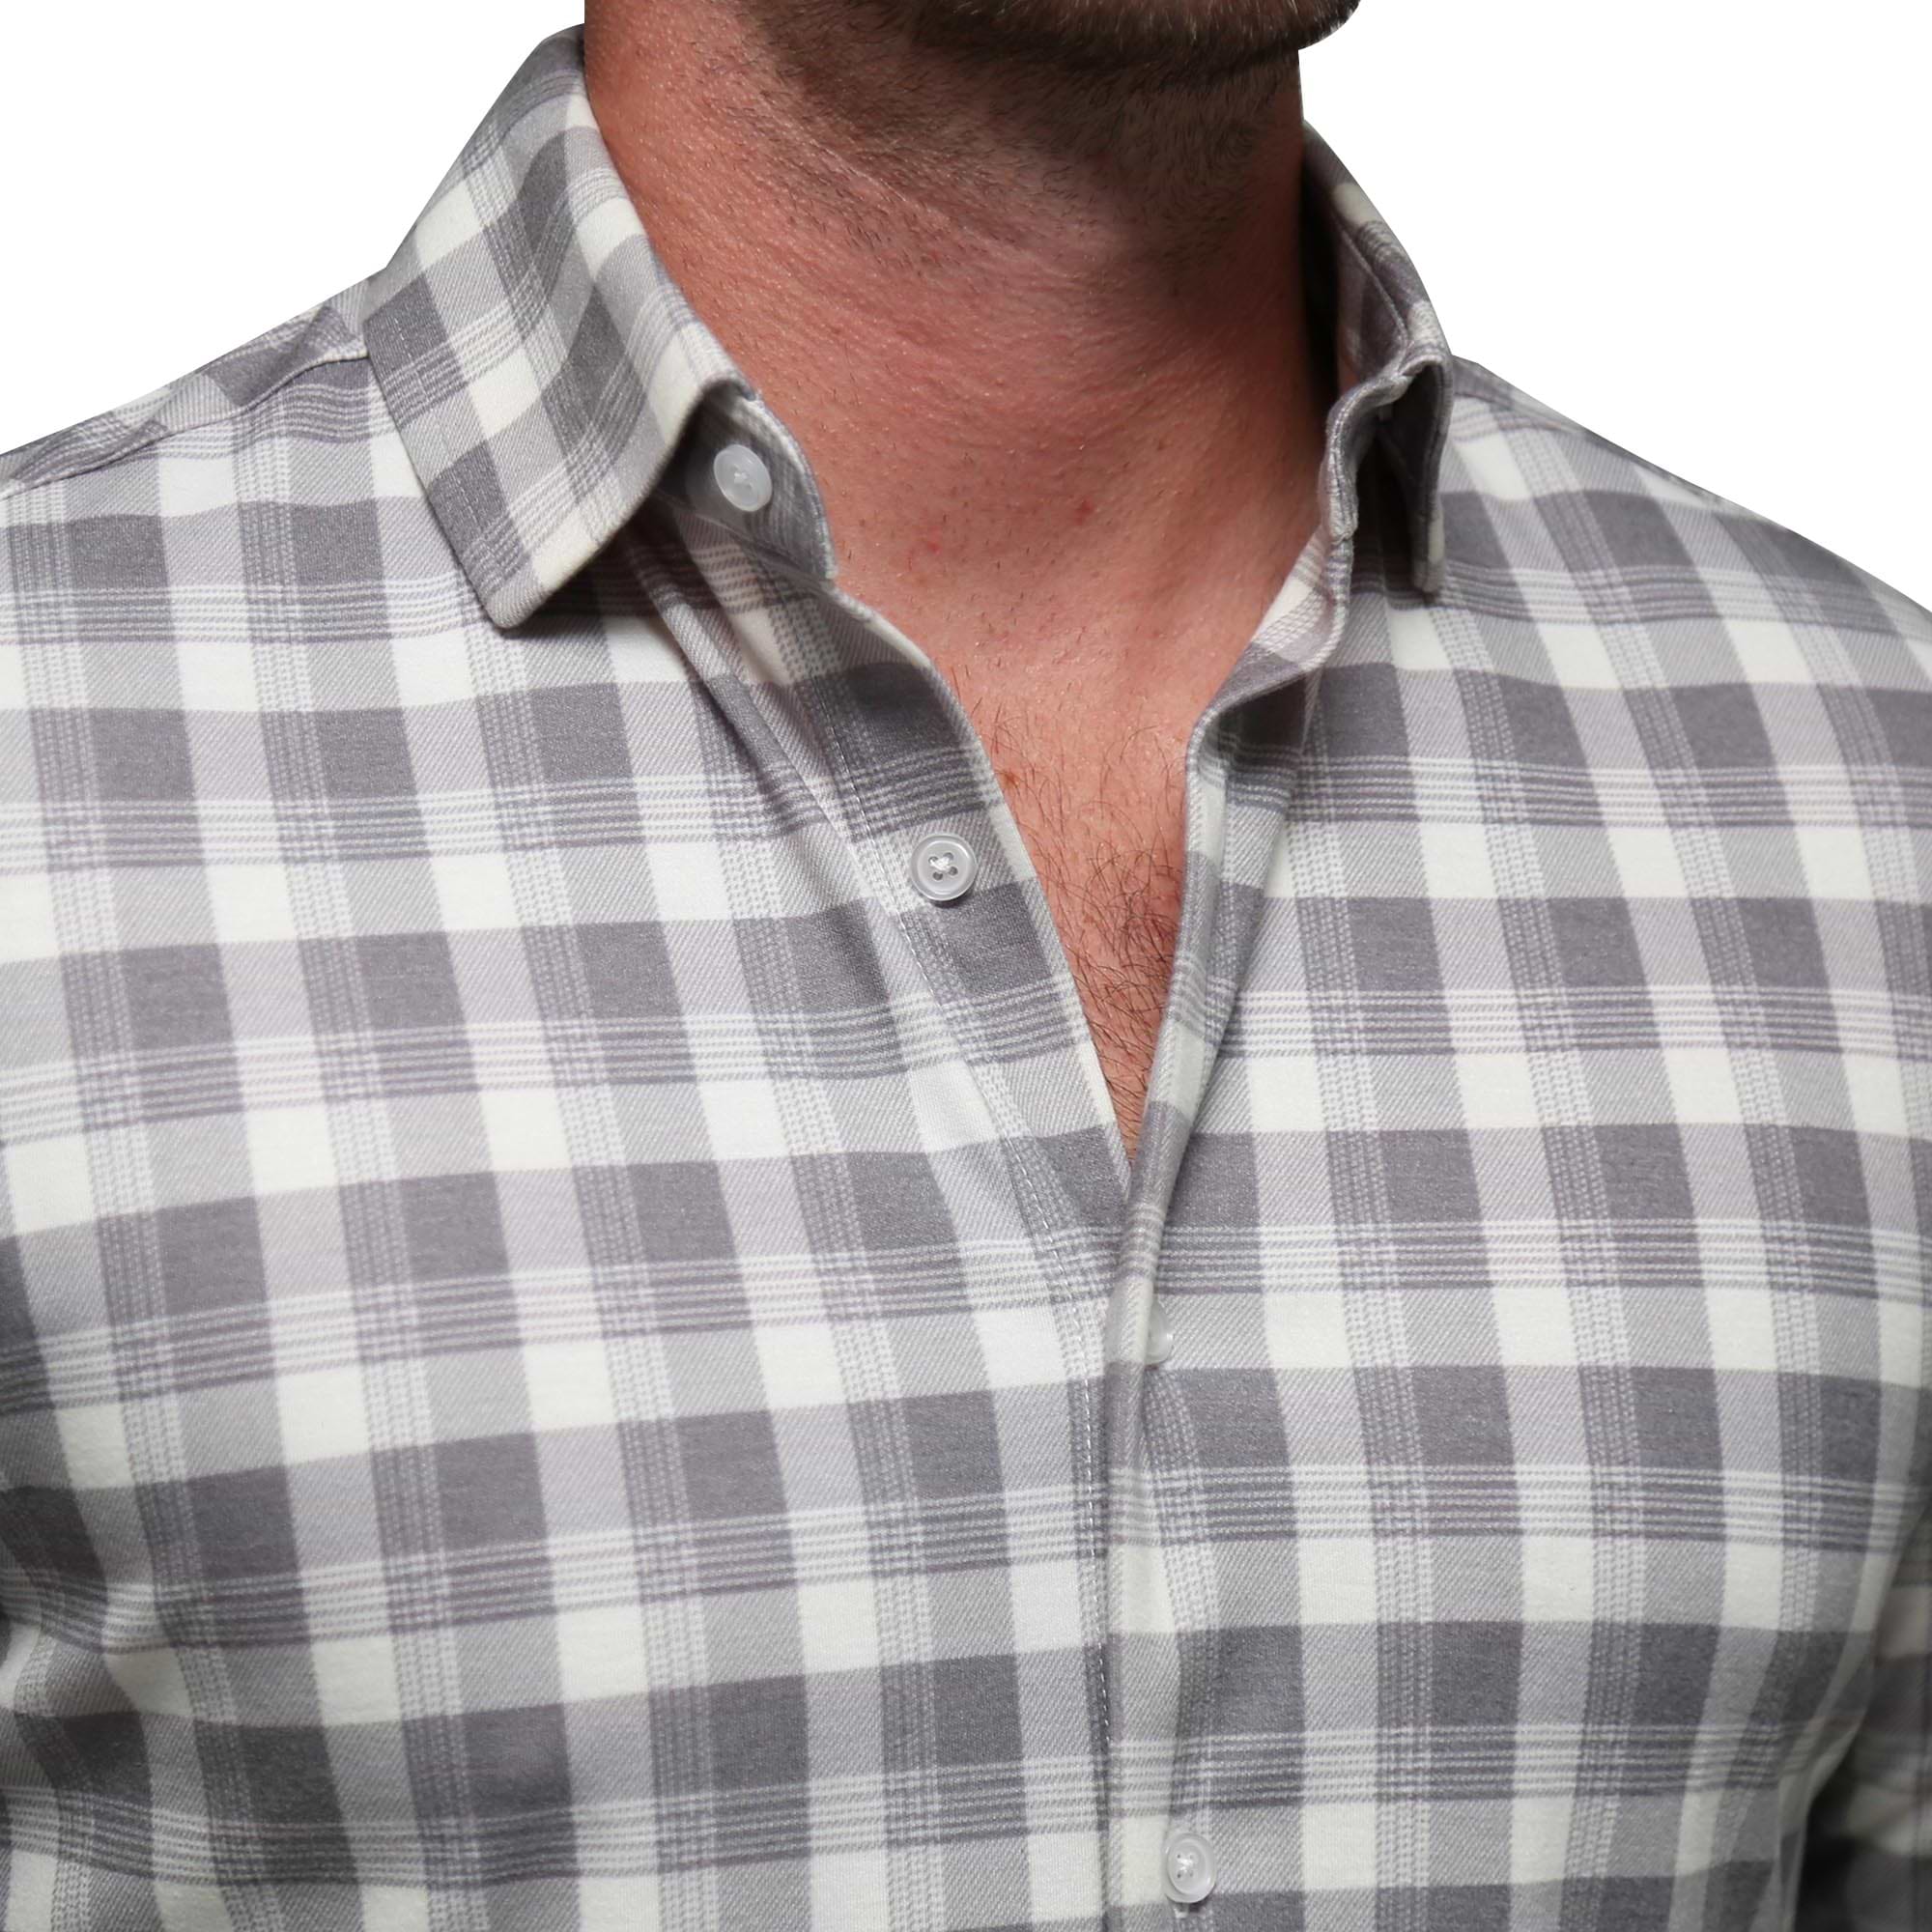 "The Holden" Grey Plaid Casual Button Down